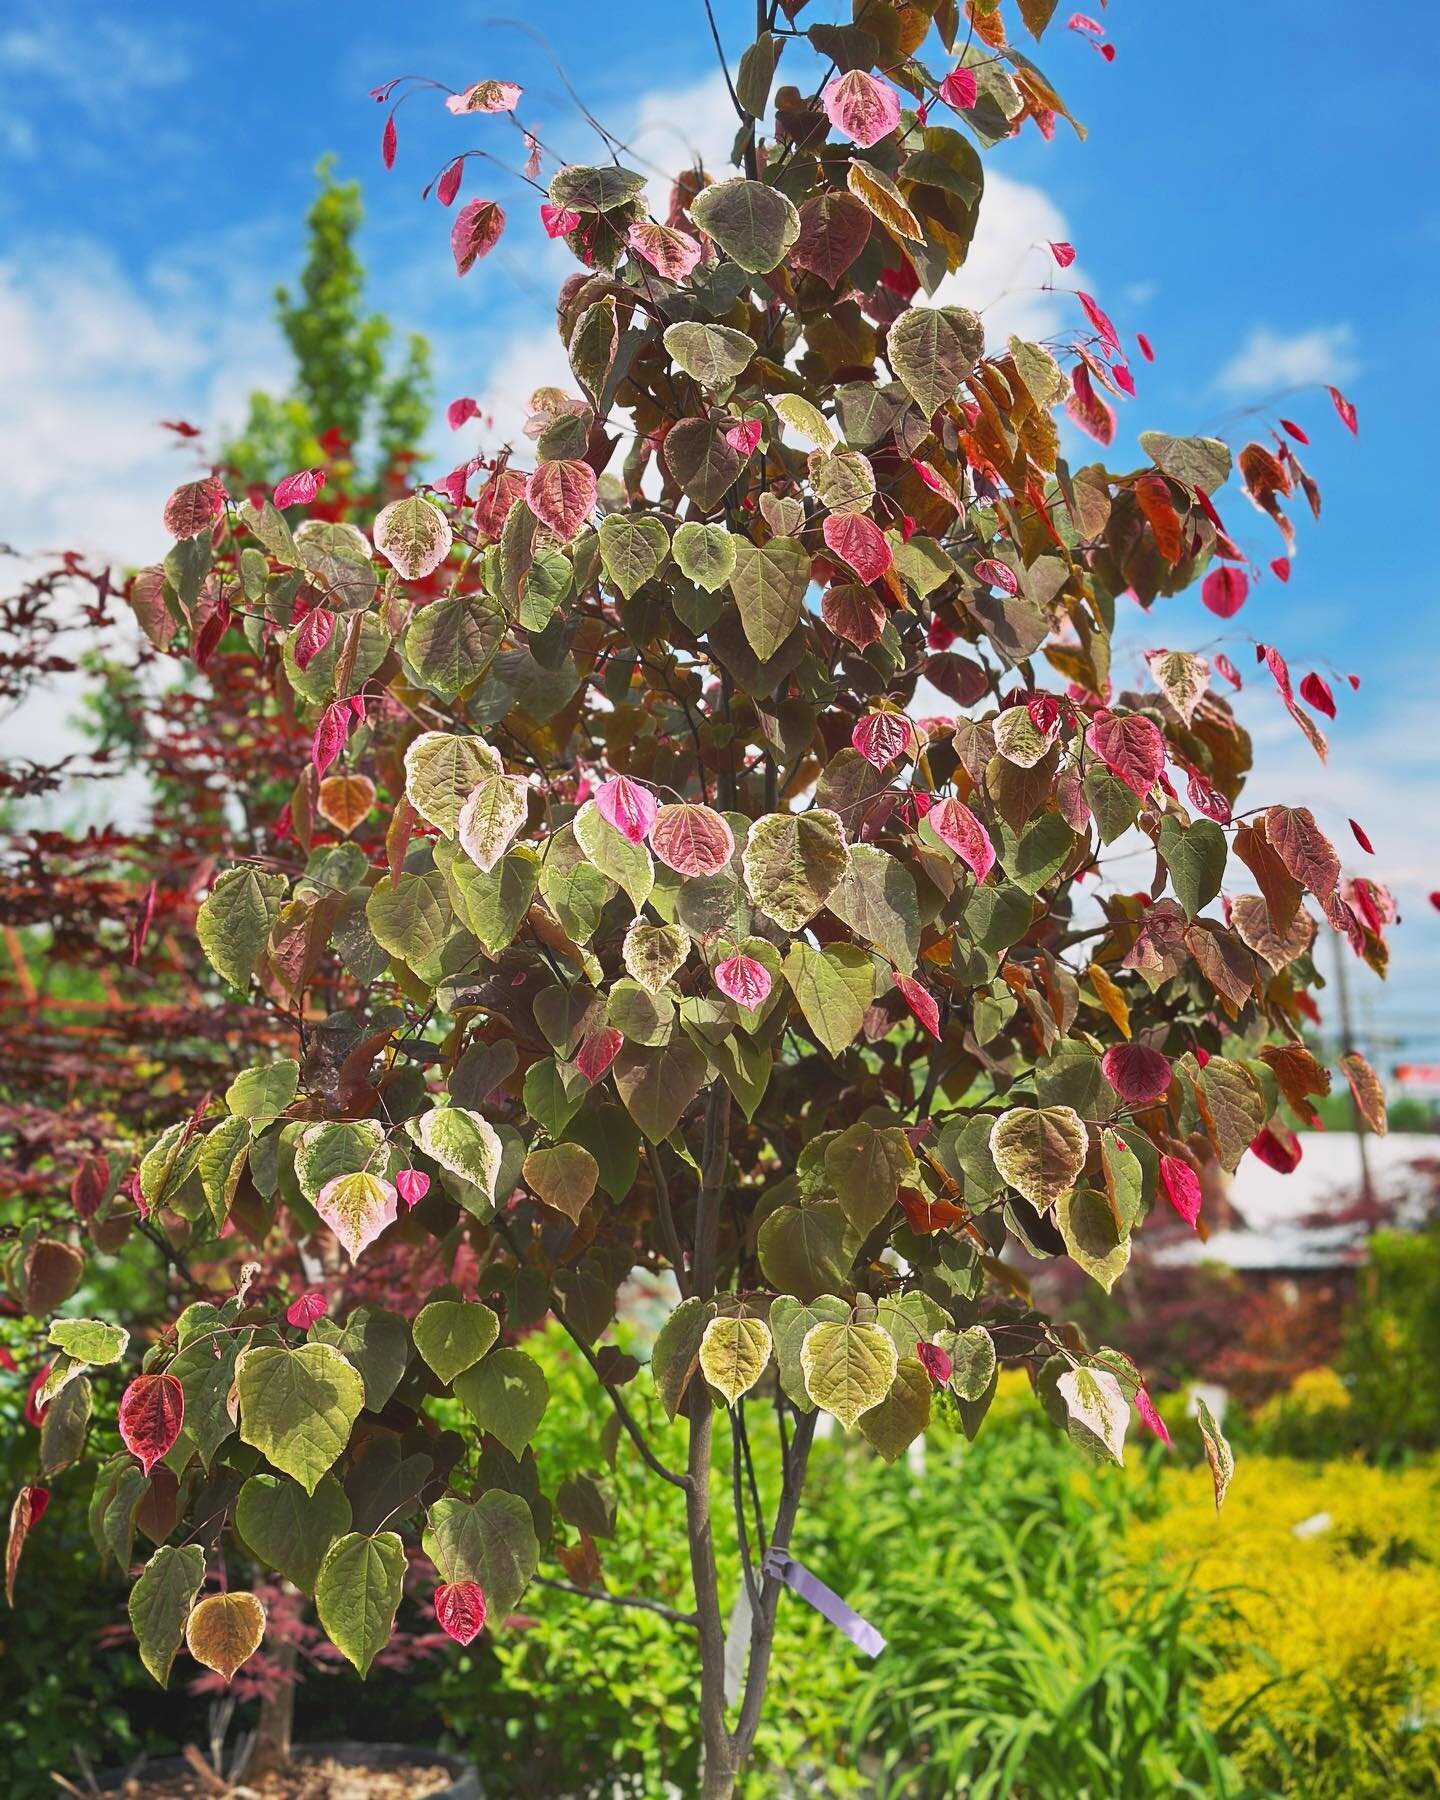 Just one look at our brand new &lsquo;Carolina Sweetheart&rsquo; Redbuds and you&rsquo;ll be on Cloud 9 😍 These beautiful trees emerge with pink variegated heart-shaped leaves which fade to green over the Spring 💕 Grows 20-30&rsquo; tall and makes 